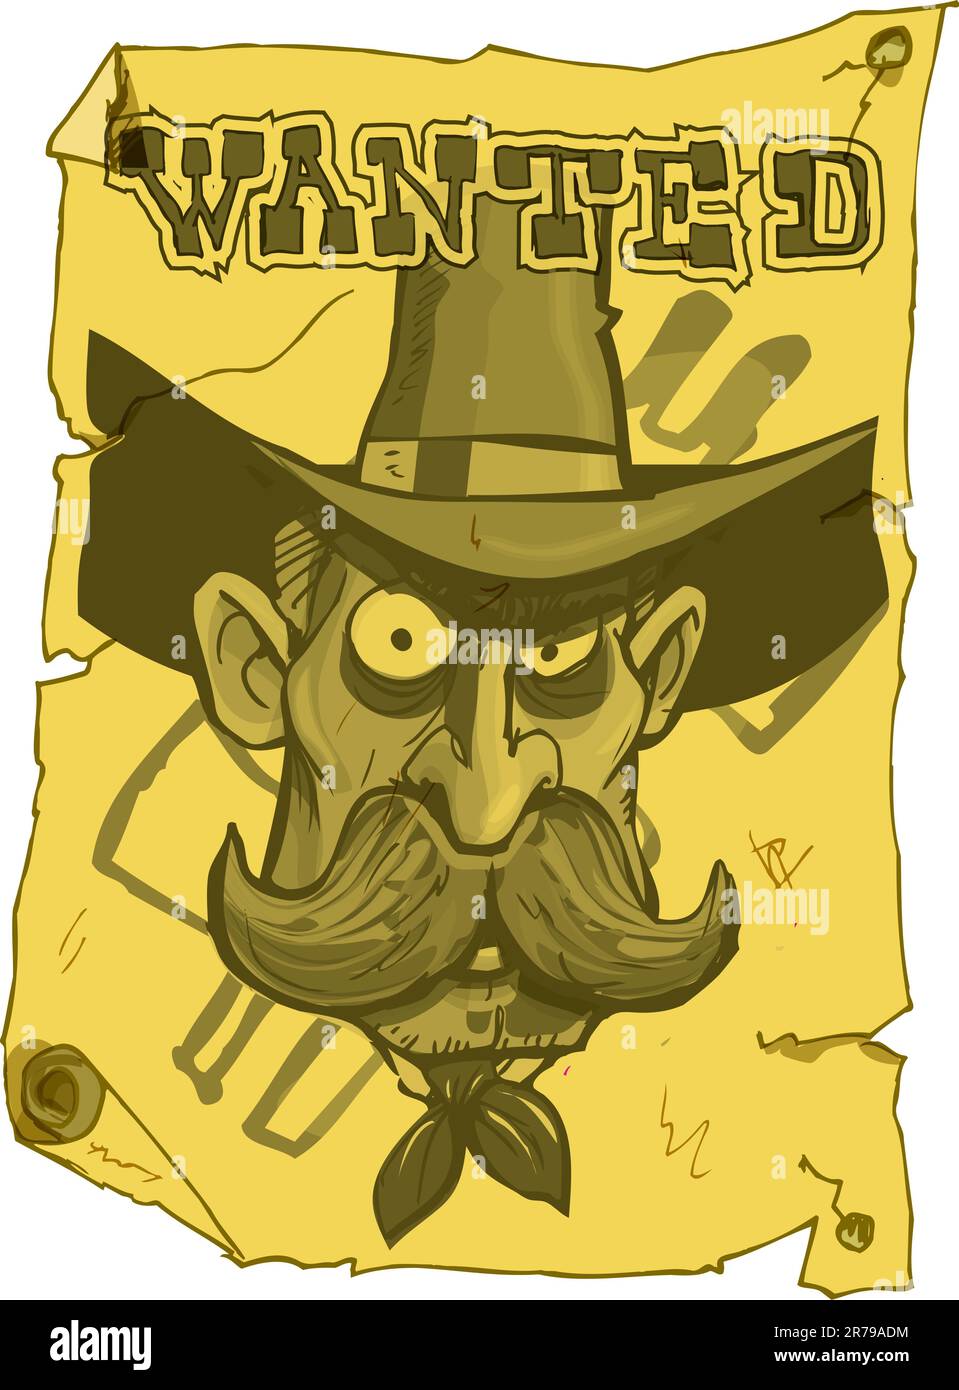 Cartoon cowboy wanted poster from the old west Stock Vector